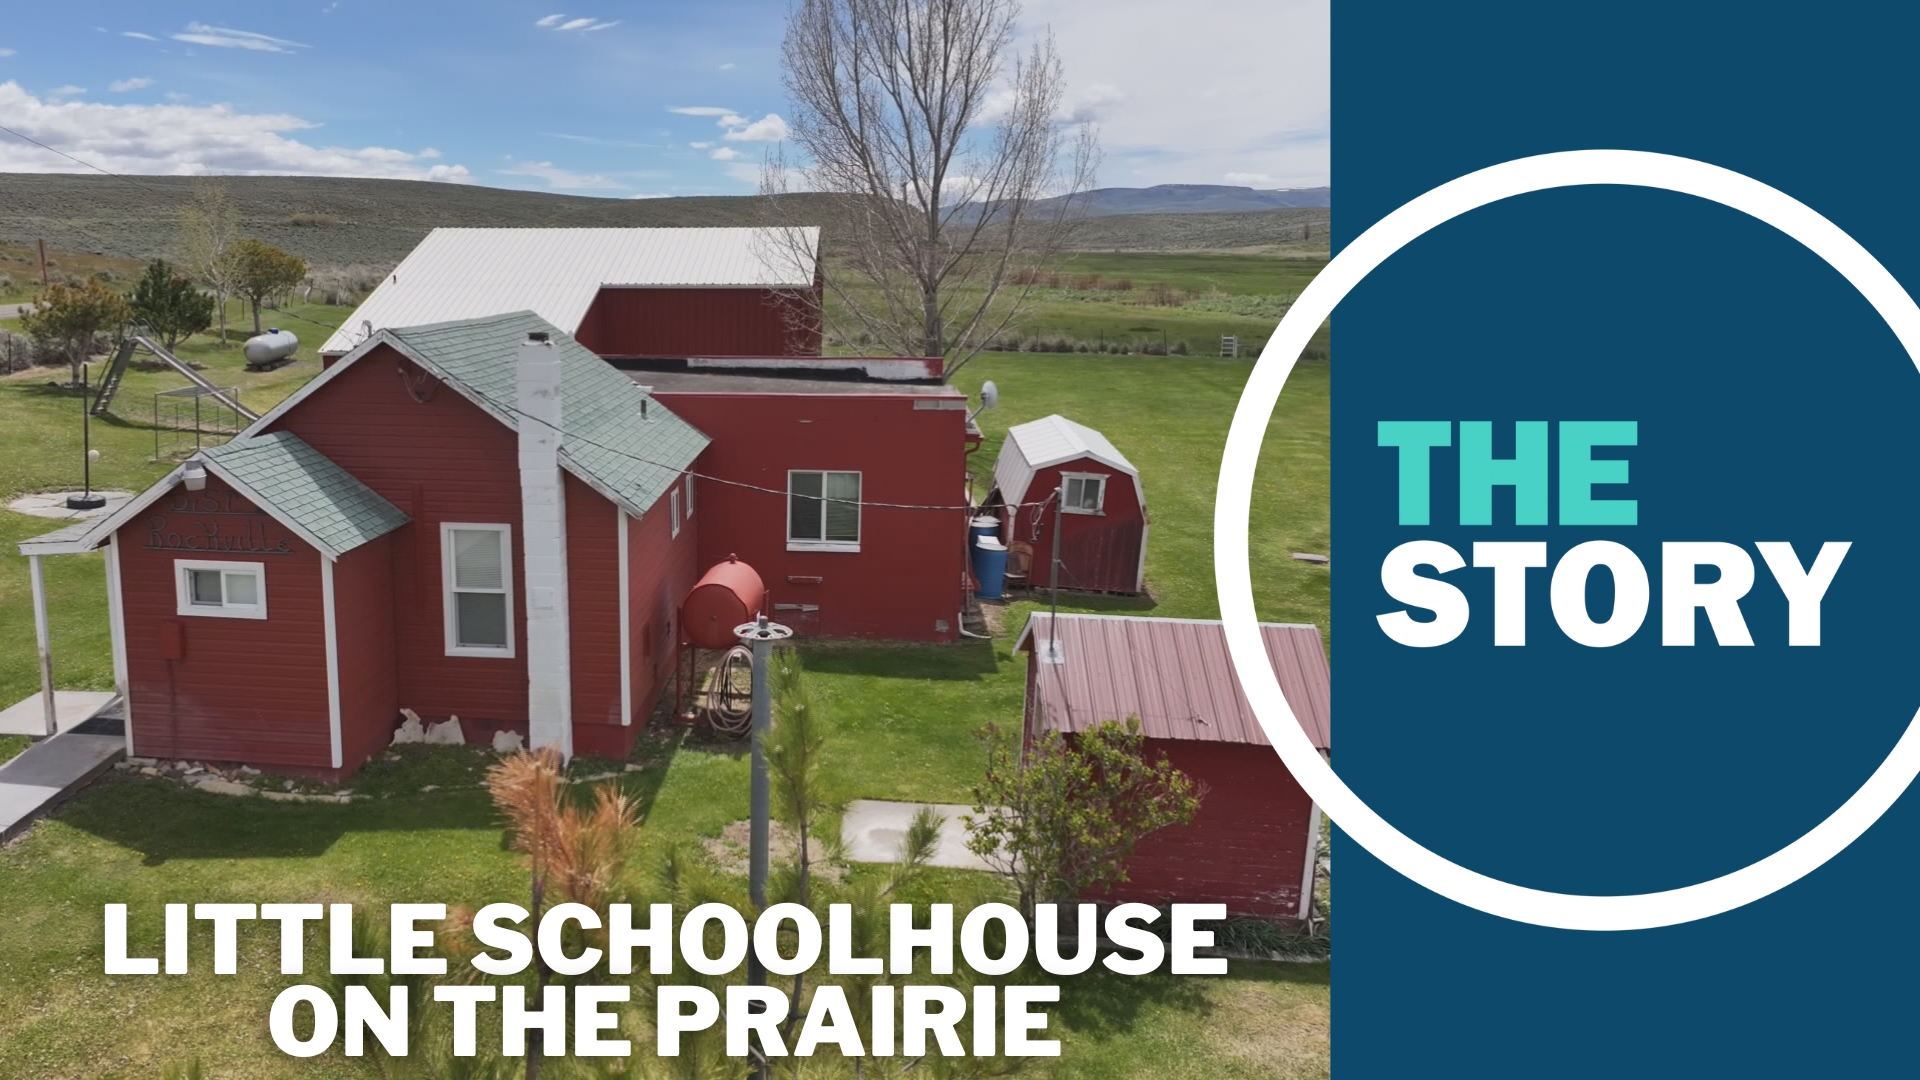 Rockville Elementary School in the Jordan Valley School District has three students this year. For around 100 years, a rural ranching community has learned there.